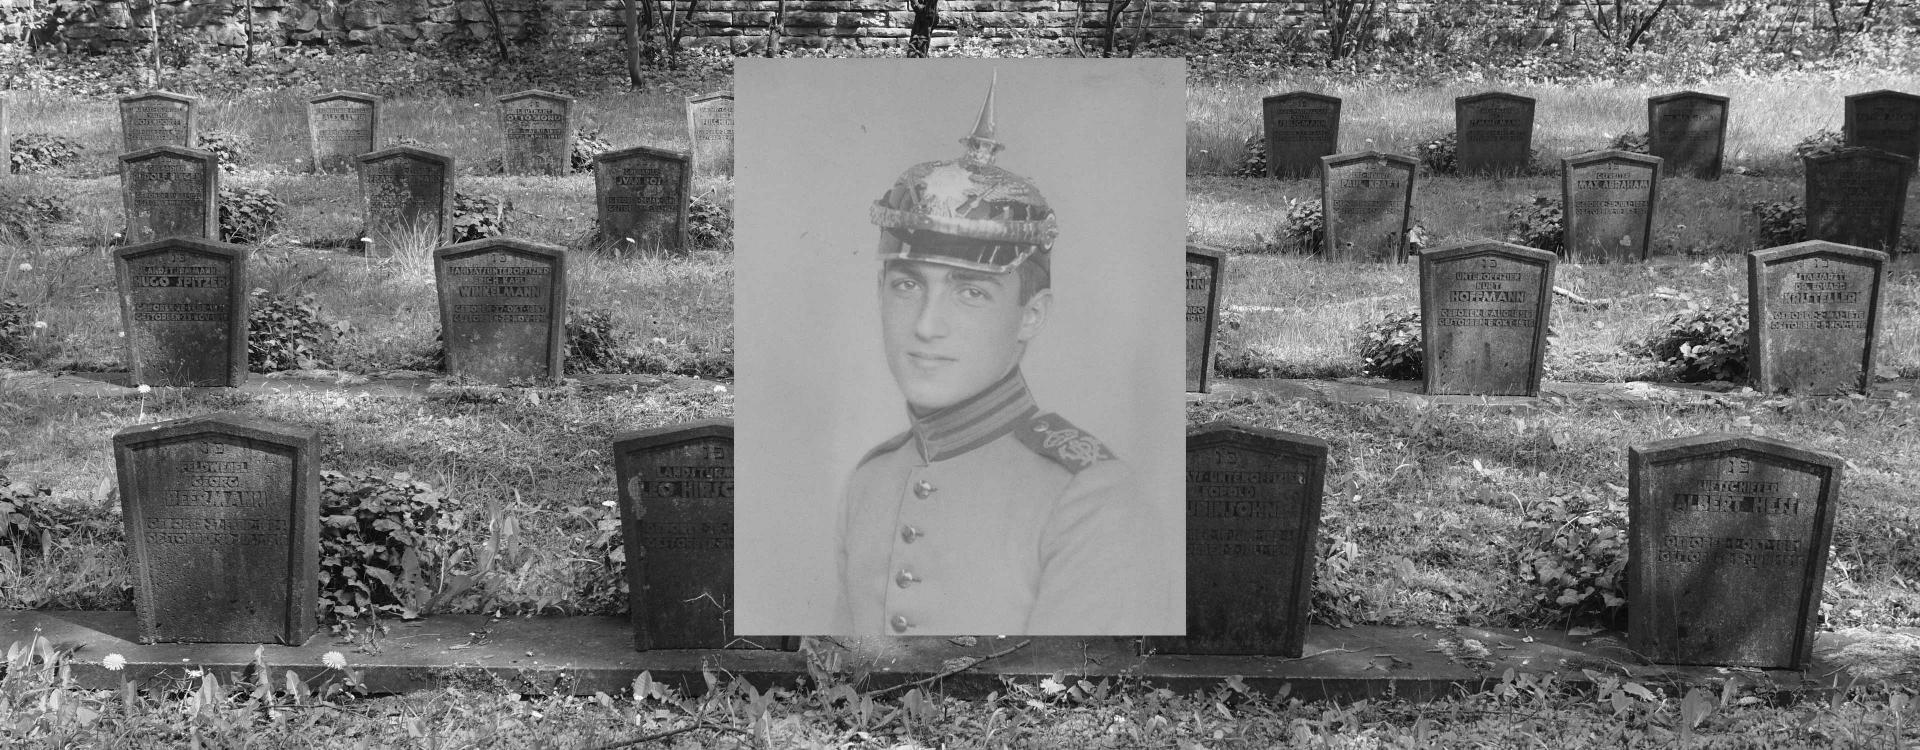 Gravestones in a cemetery with a drawing of a soldier above them.